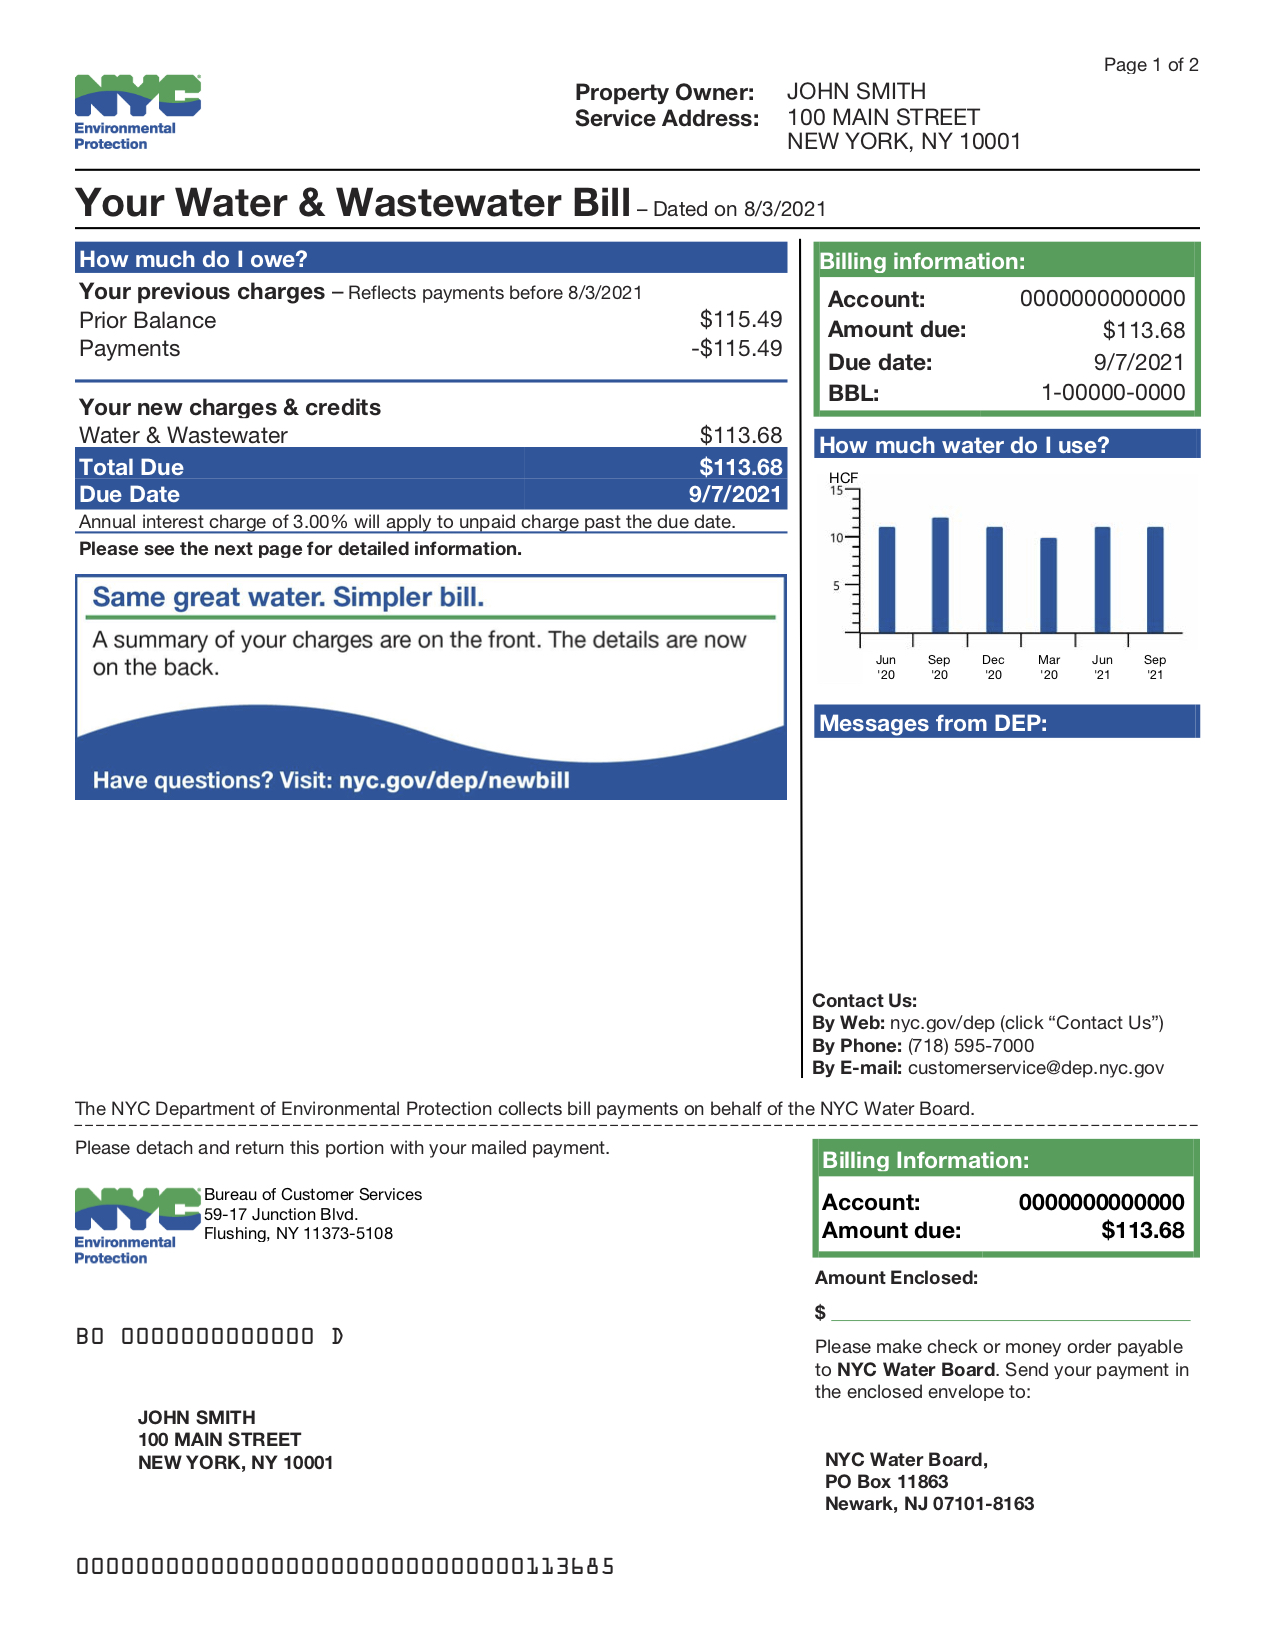 an example front page of the new water and sewer bill